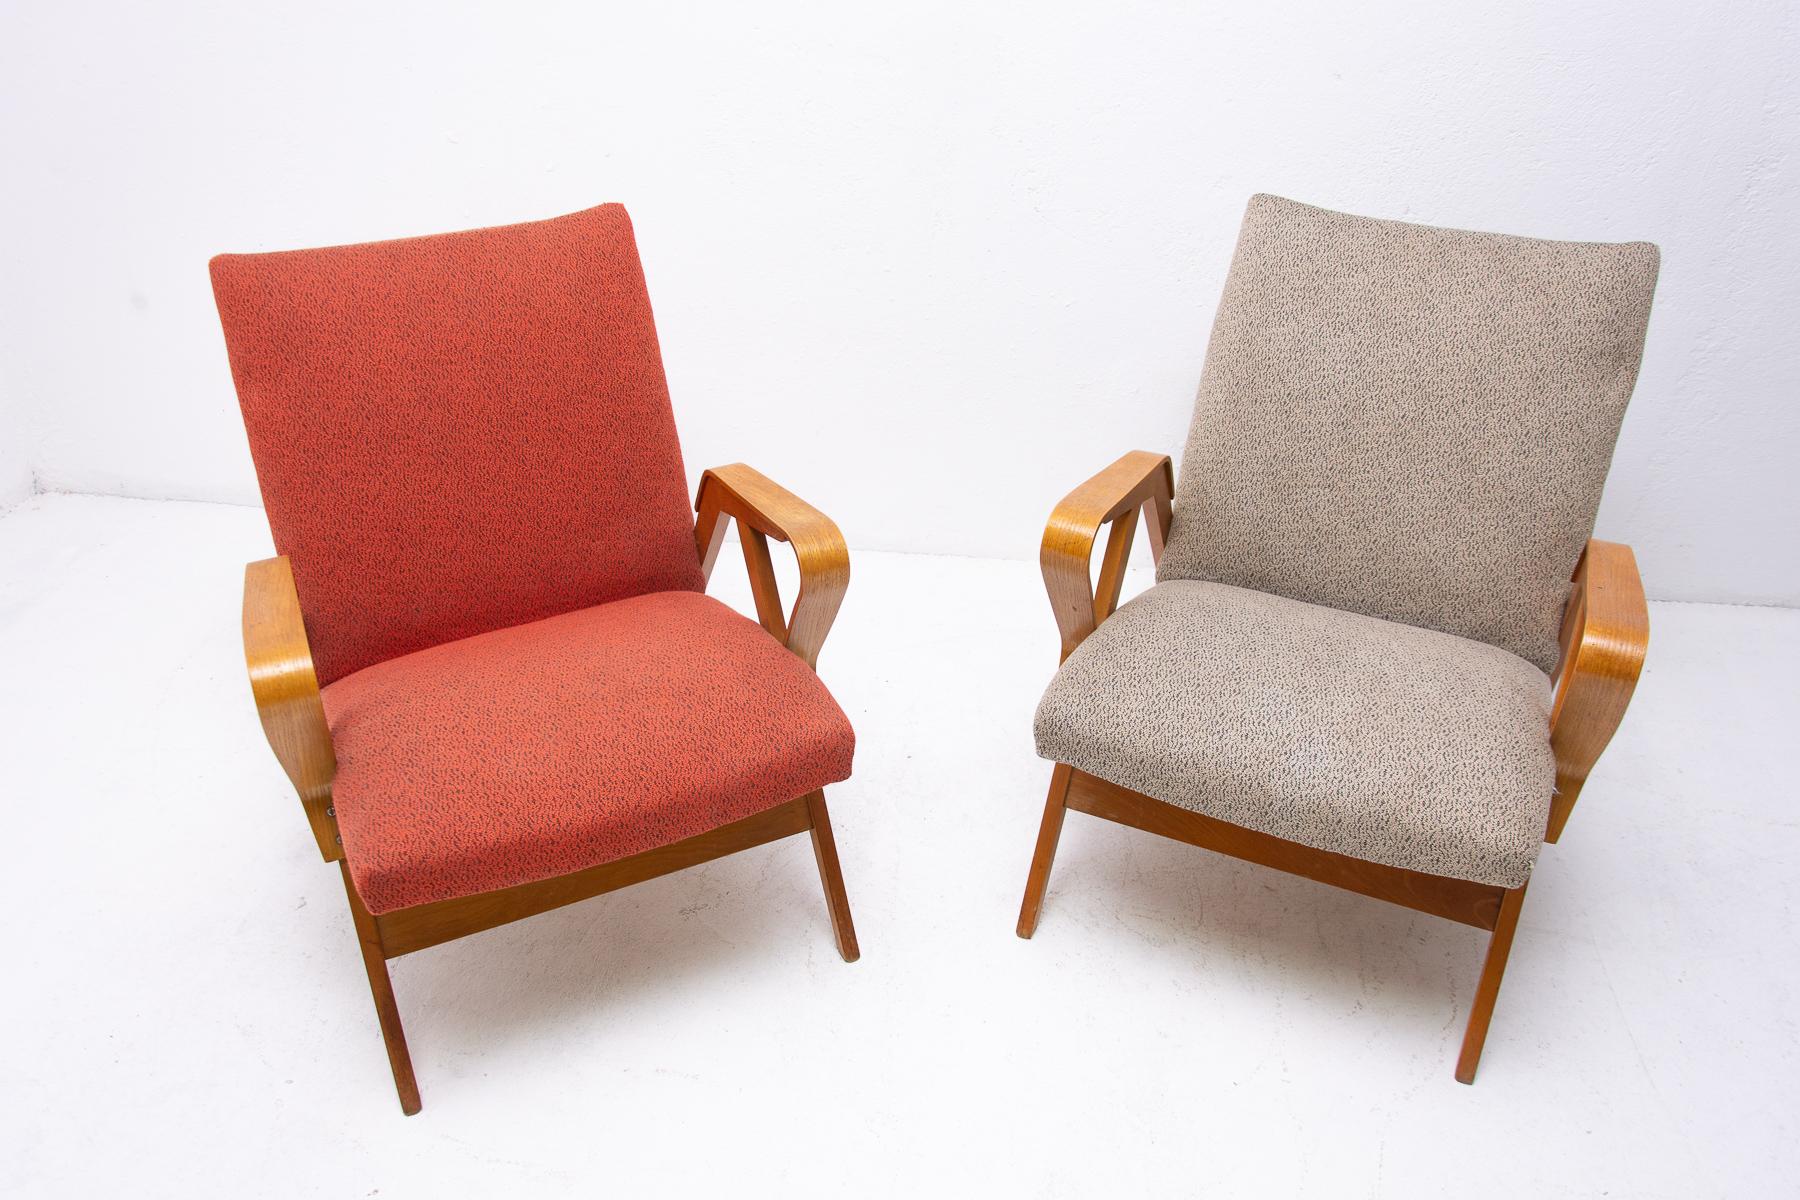 These Czechoslovak lounge armchairs No.24-23 were designed by František Jirák for Tatra Nabytok in the former Czechoslovakia in the 1960s. The design of these chairs followed the huge success of the Czechoslovak pavilion at the Brussels Expo